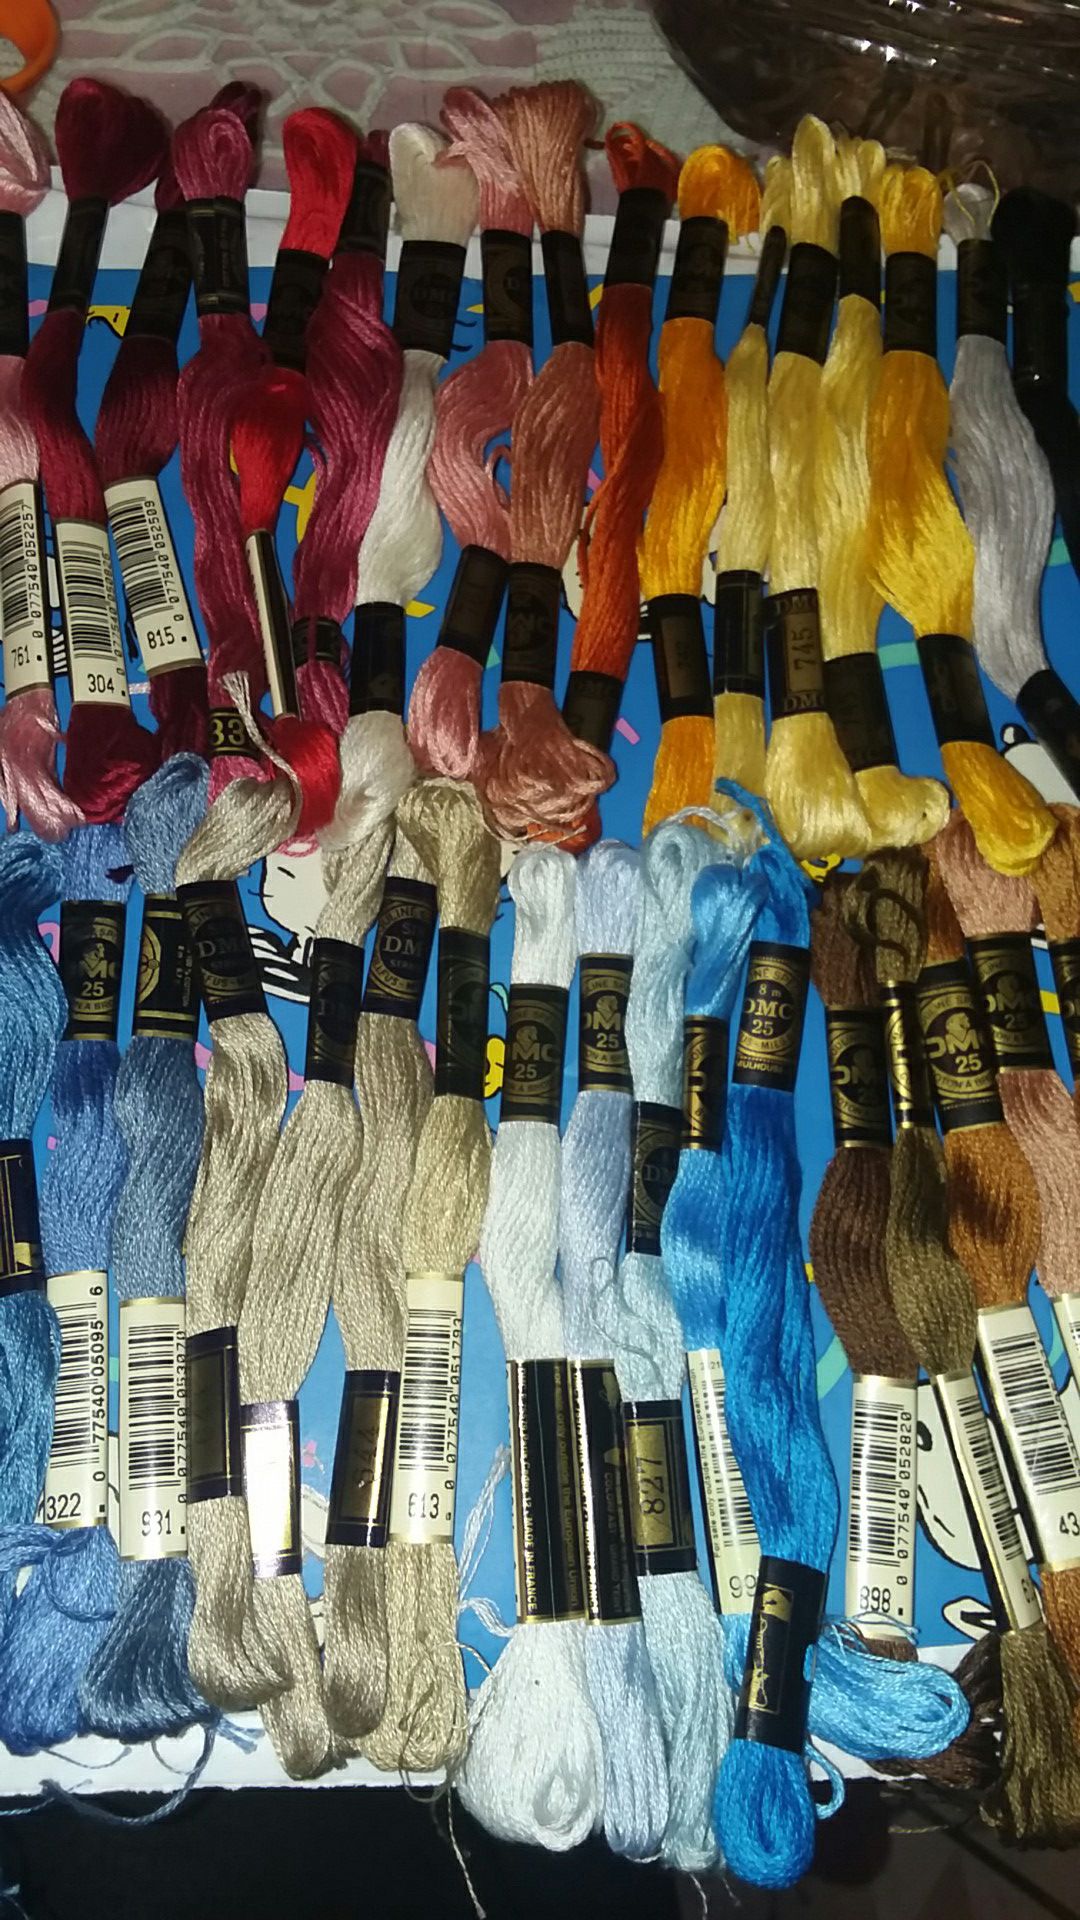 40 pc DMC embroidery floss lot rainbow of colors made in France lot 25